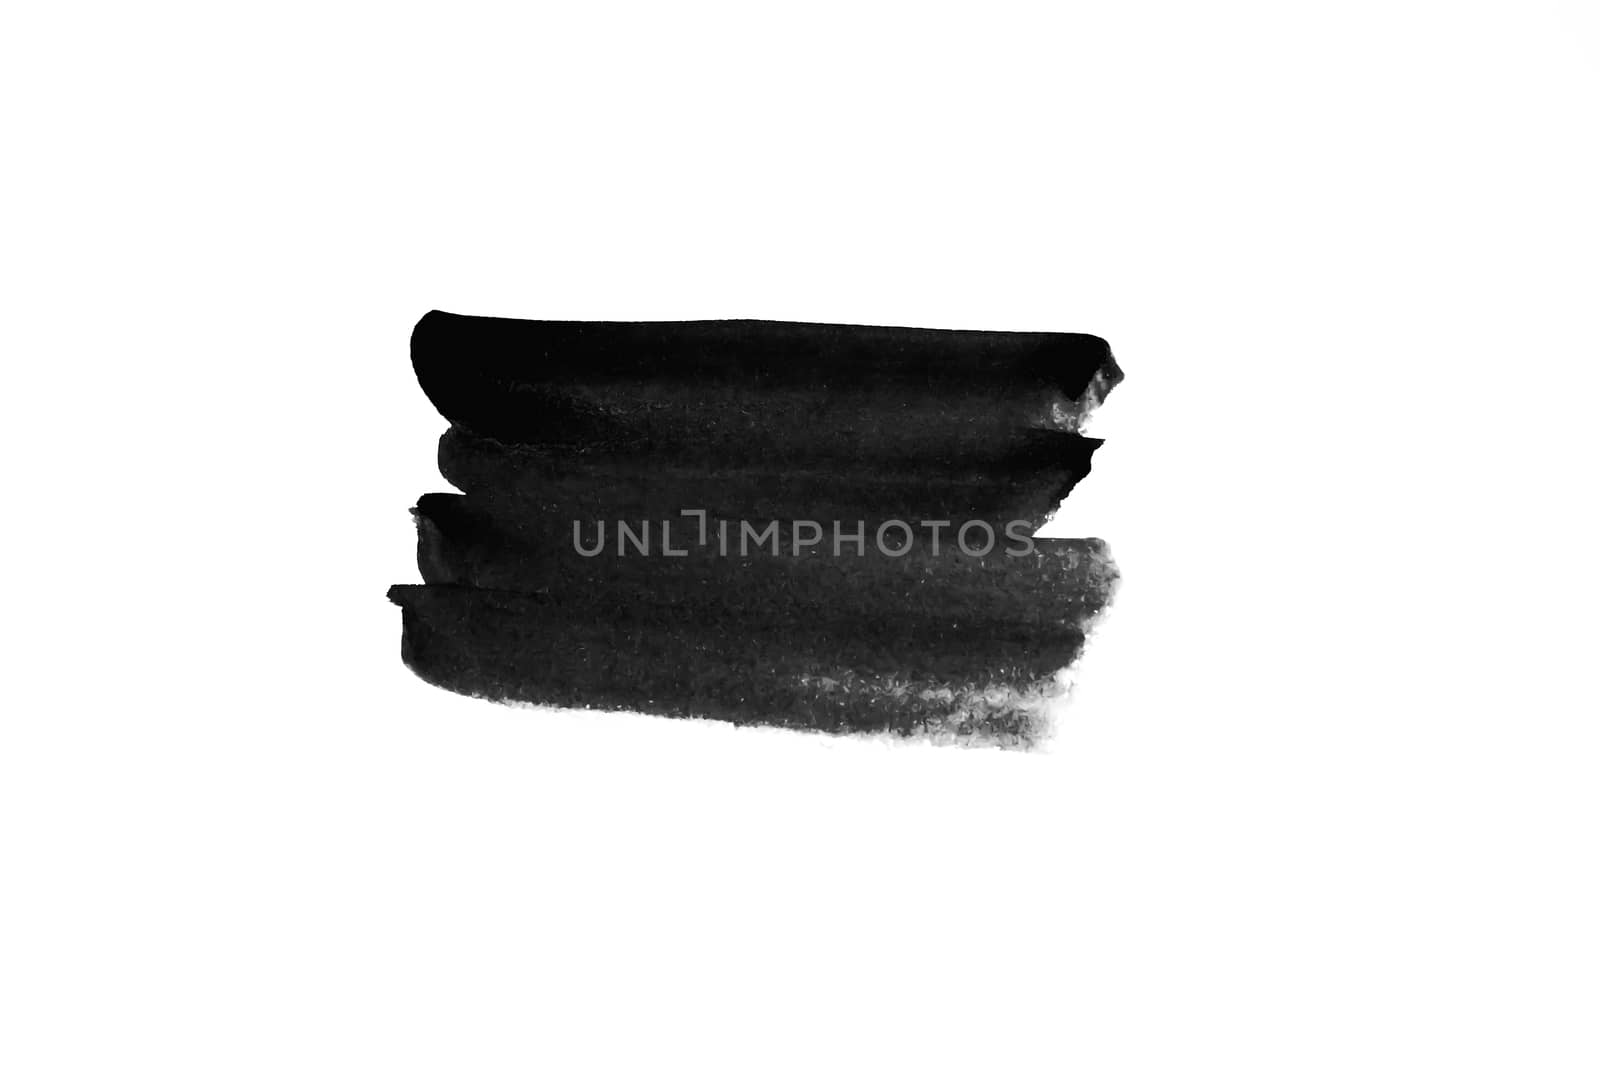 Abstract Ink paint isolate on white background